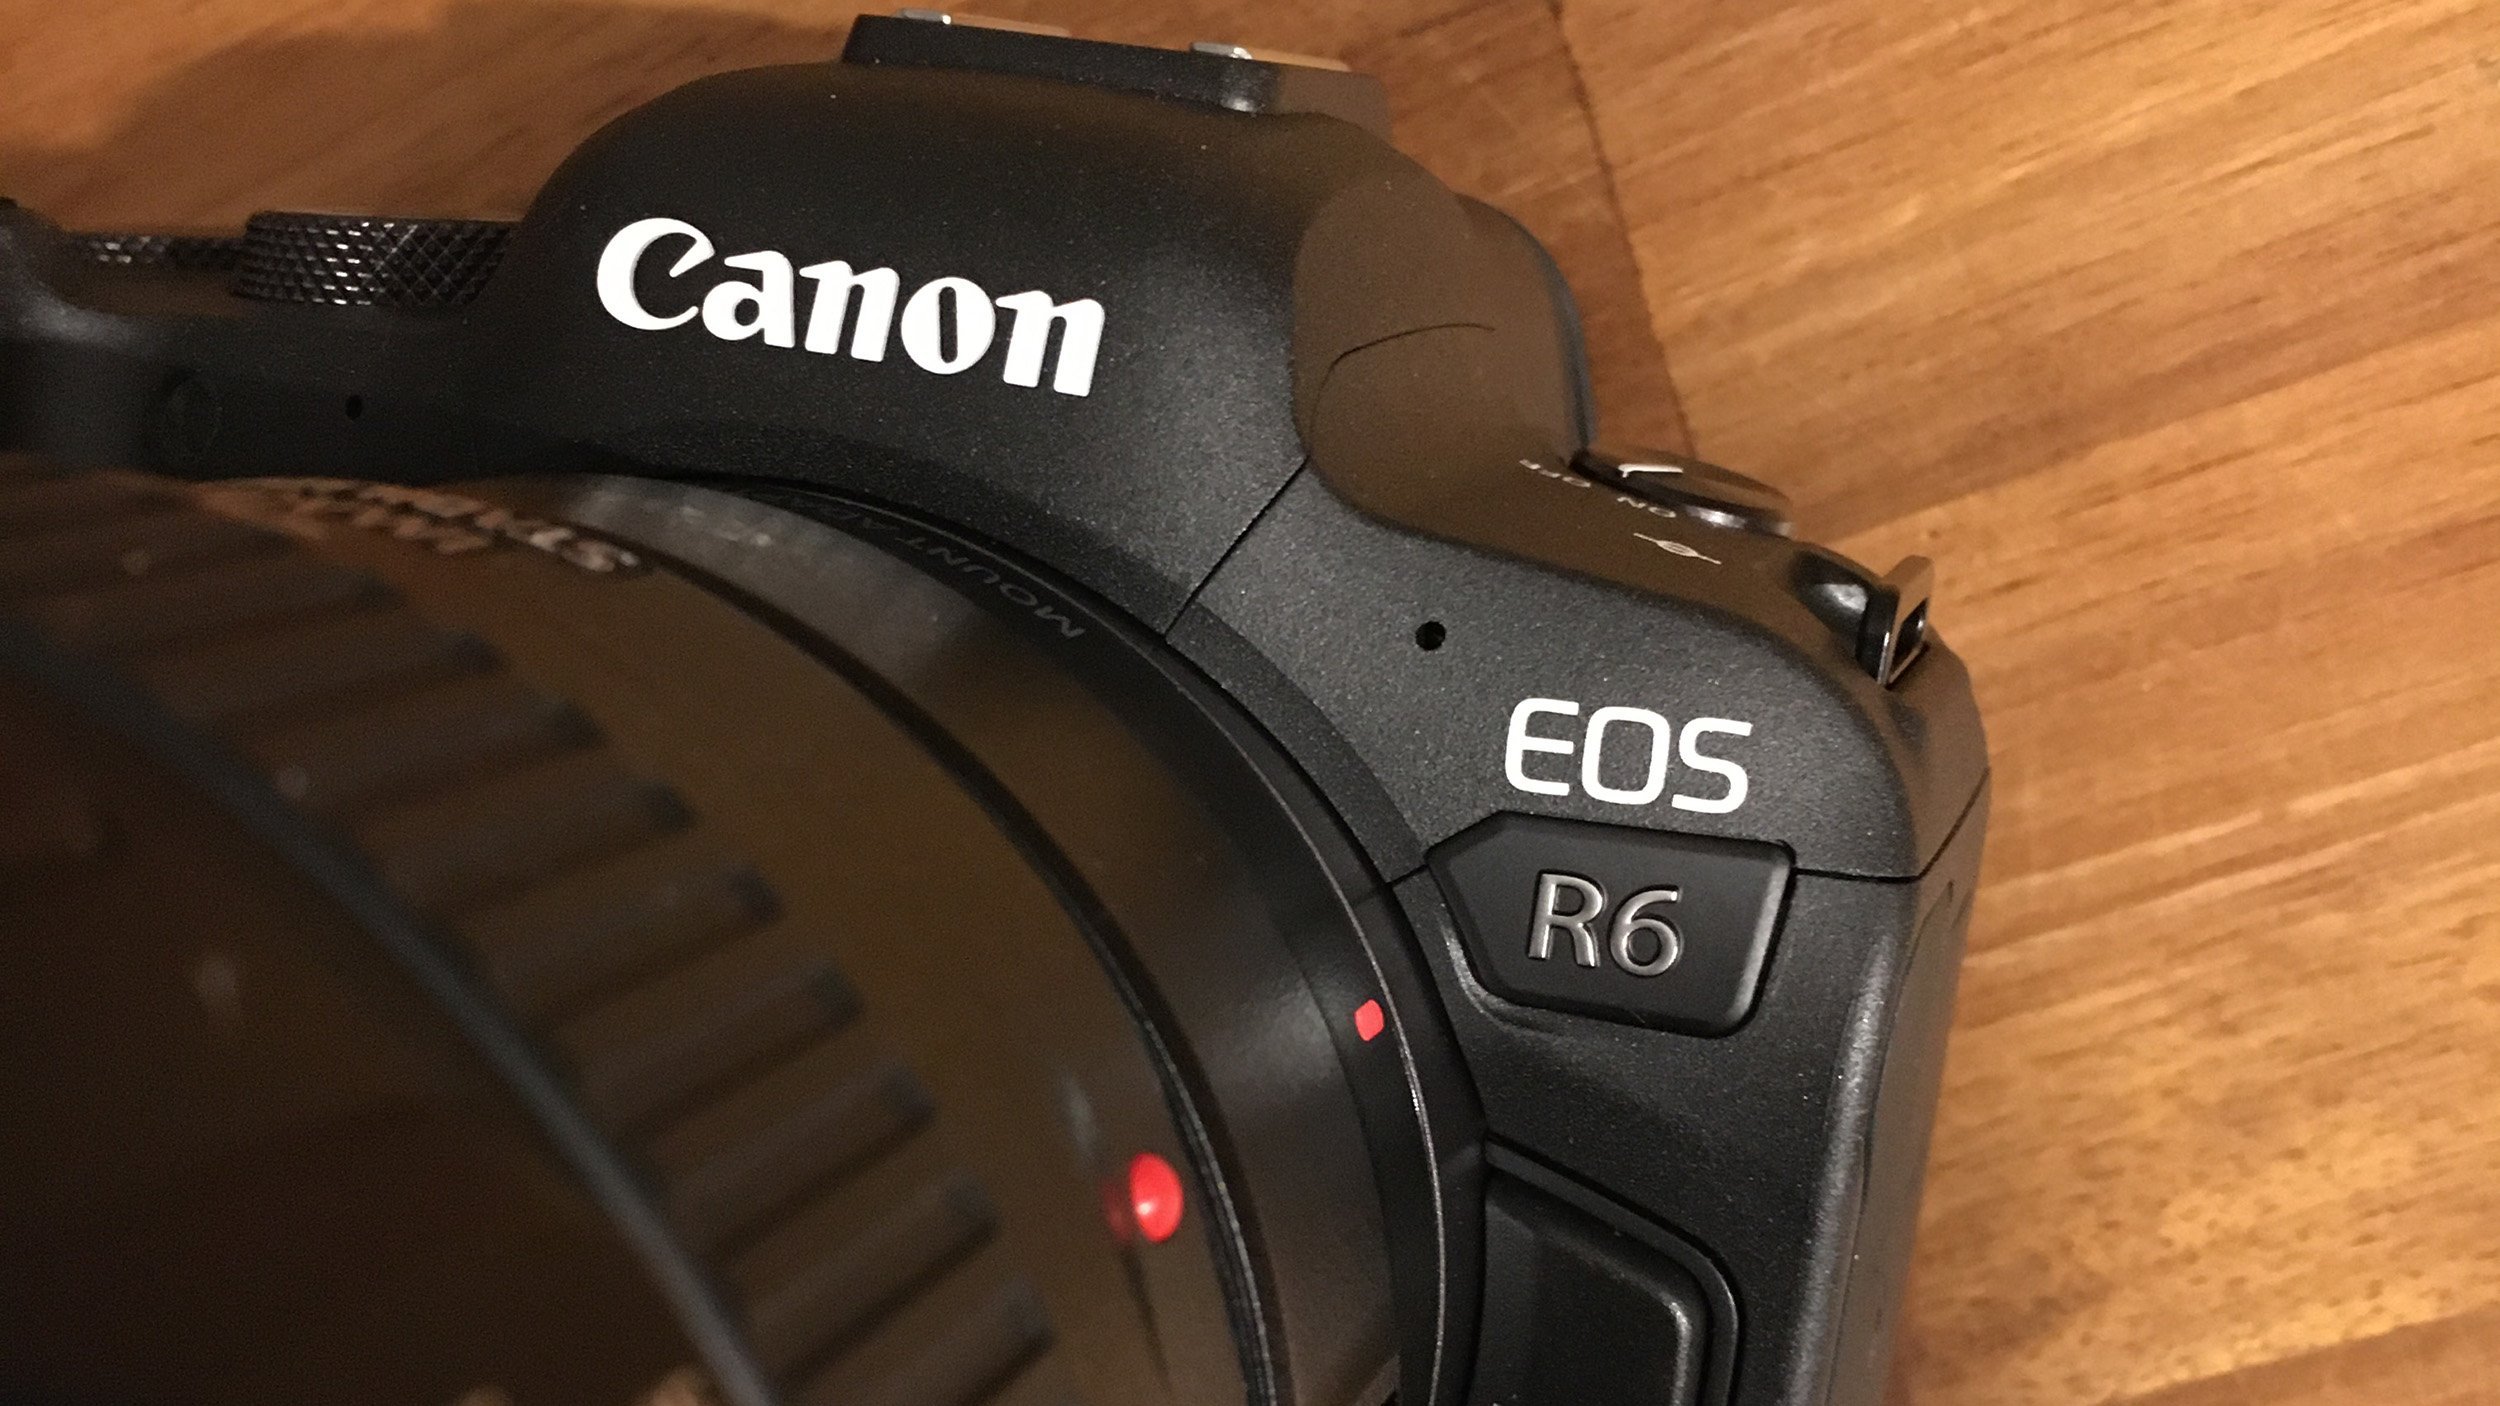 Canon EOS R6, an exceptional mirrorless camera for wildlife